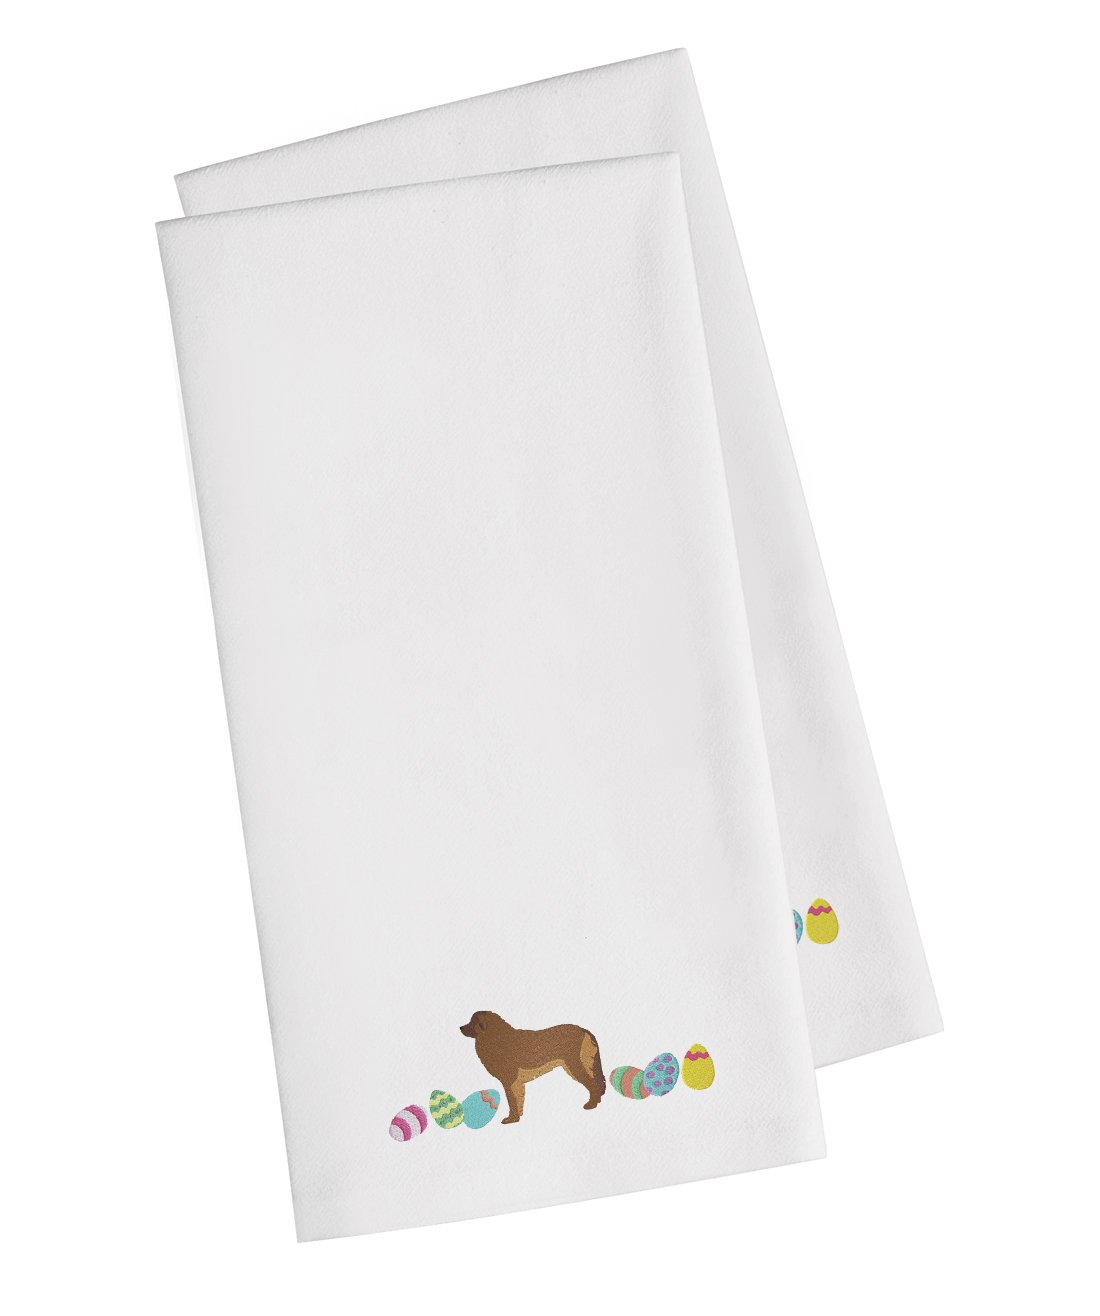 Leonberger Easter White Embroidered Kitchen Towel Set of 2 CK1661WHTWE by Caroline's Treasures